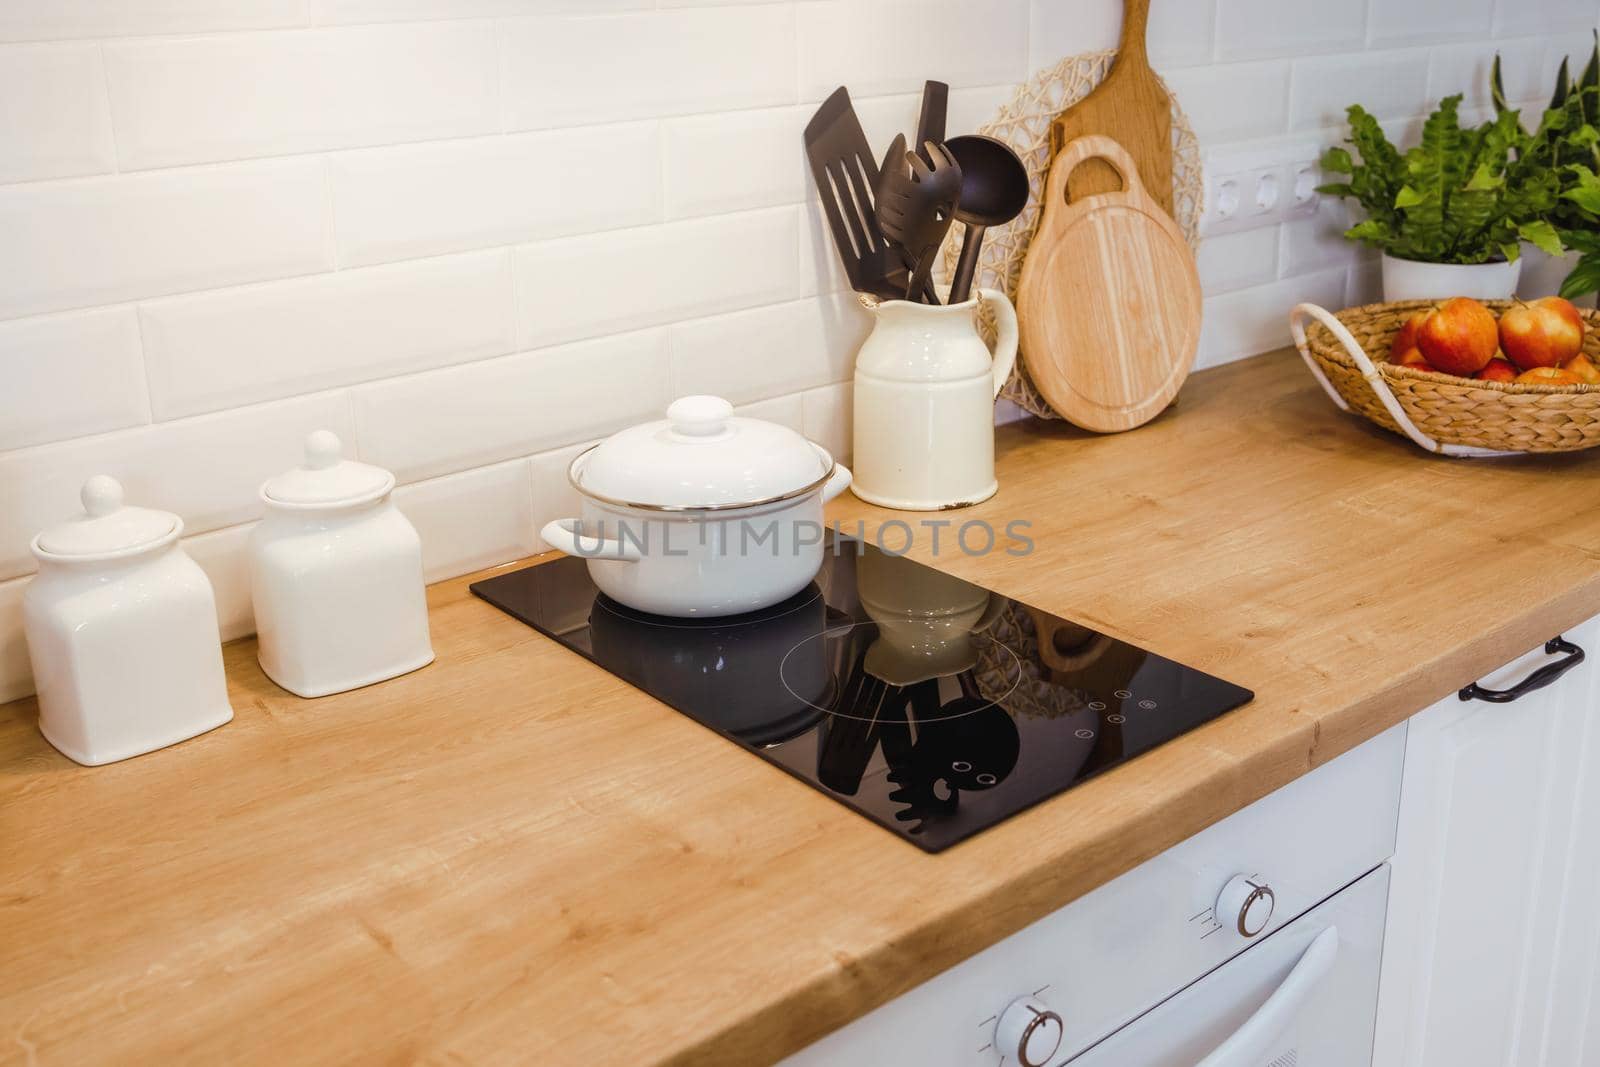 Mock-up with kitchen equipment Wooden table surface with induction cooker and kitchen utensils, in the rays of sunlight. Healthy food and natural products concept, copy paste